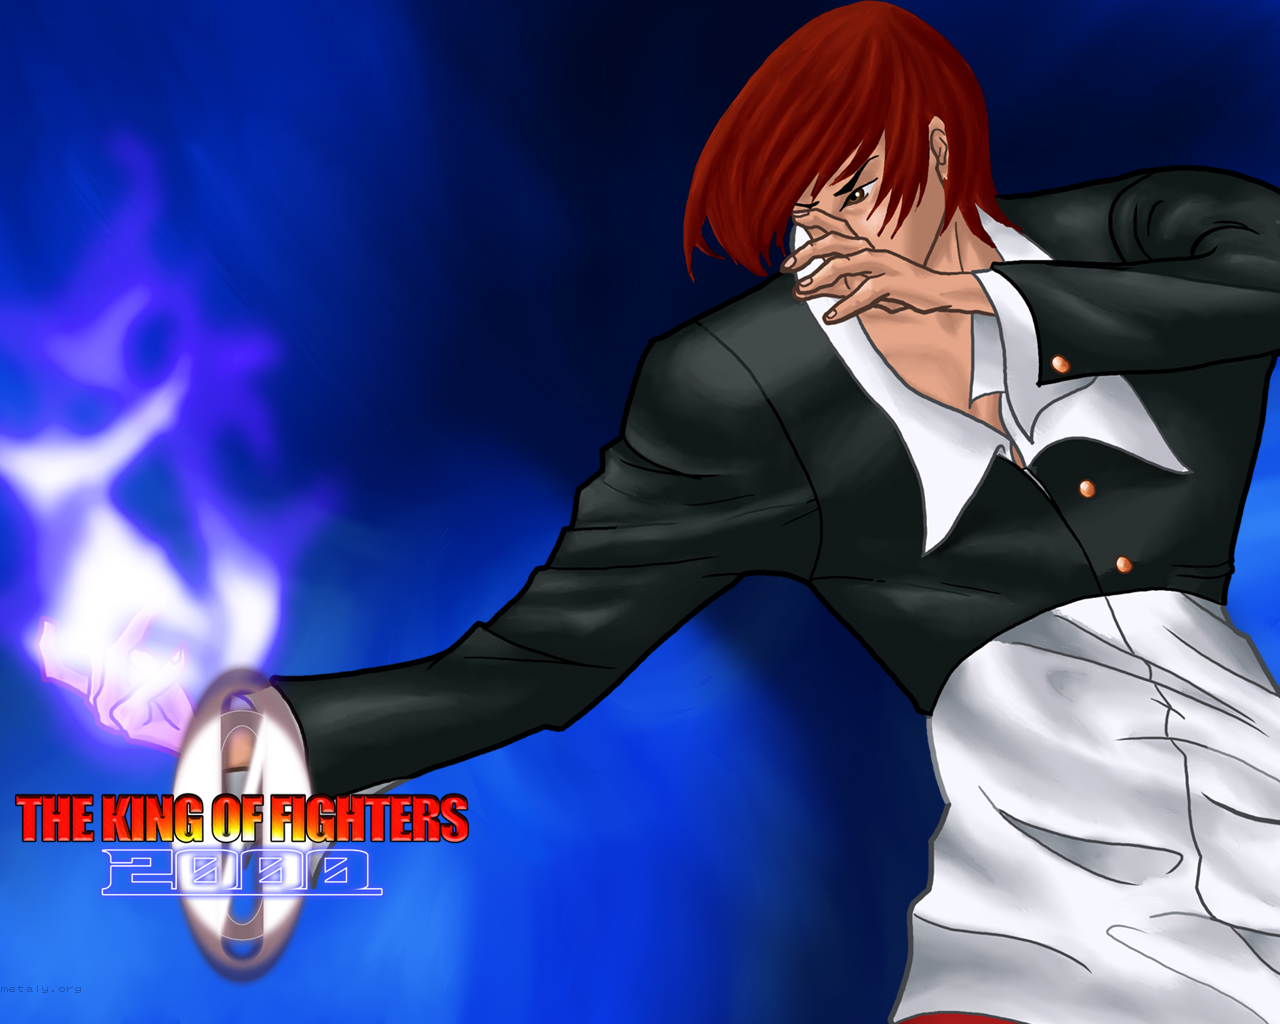 Honesty kof is um confronto Our orochi iori, see me playing as normal As 